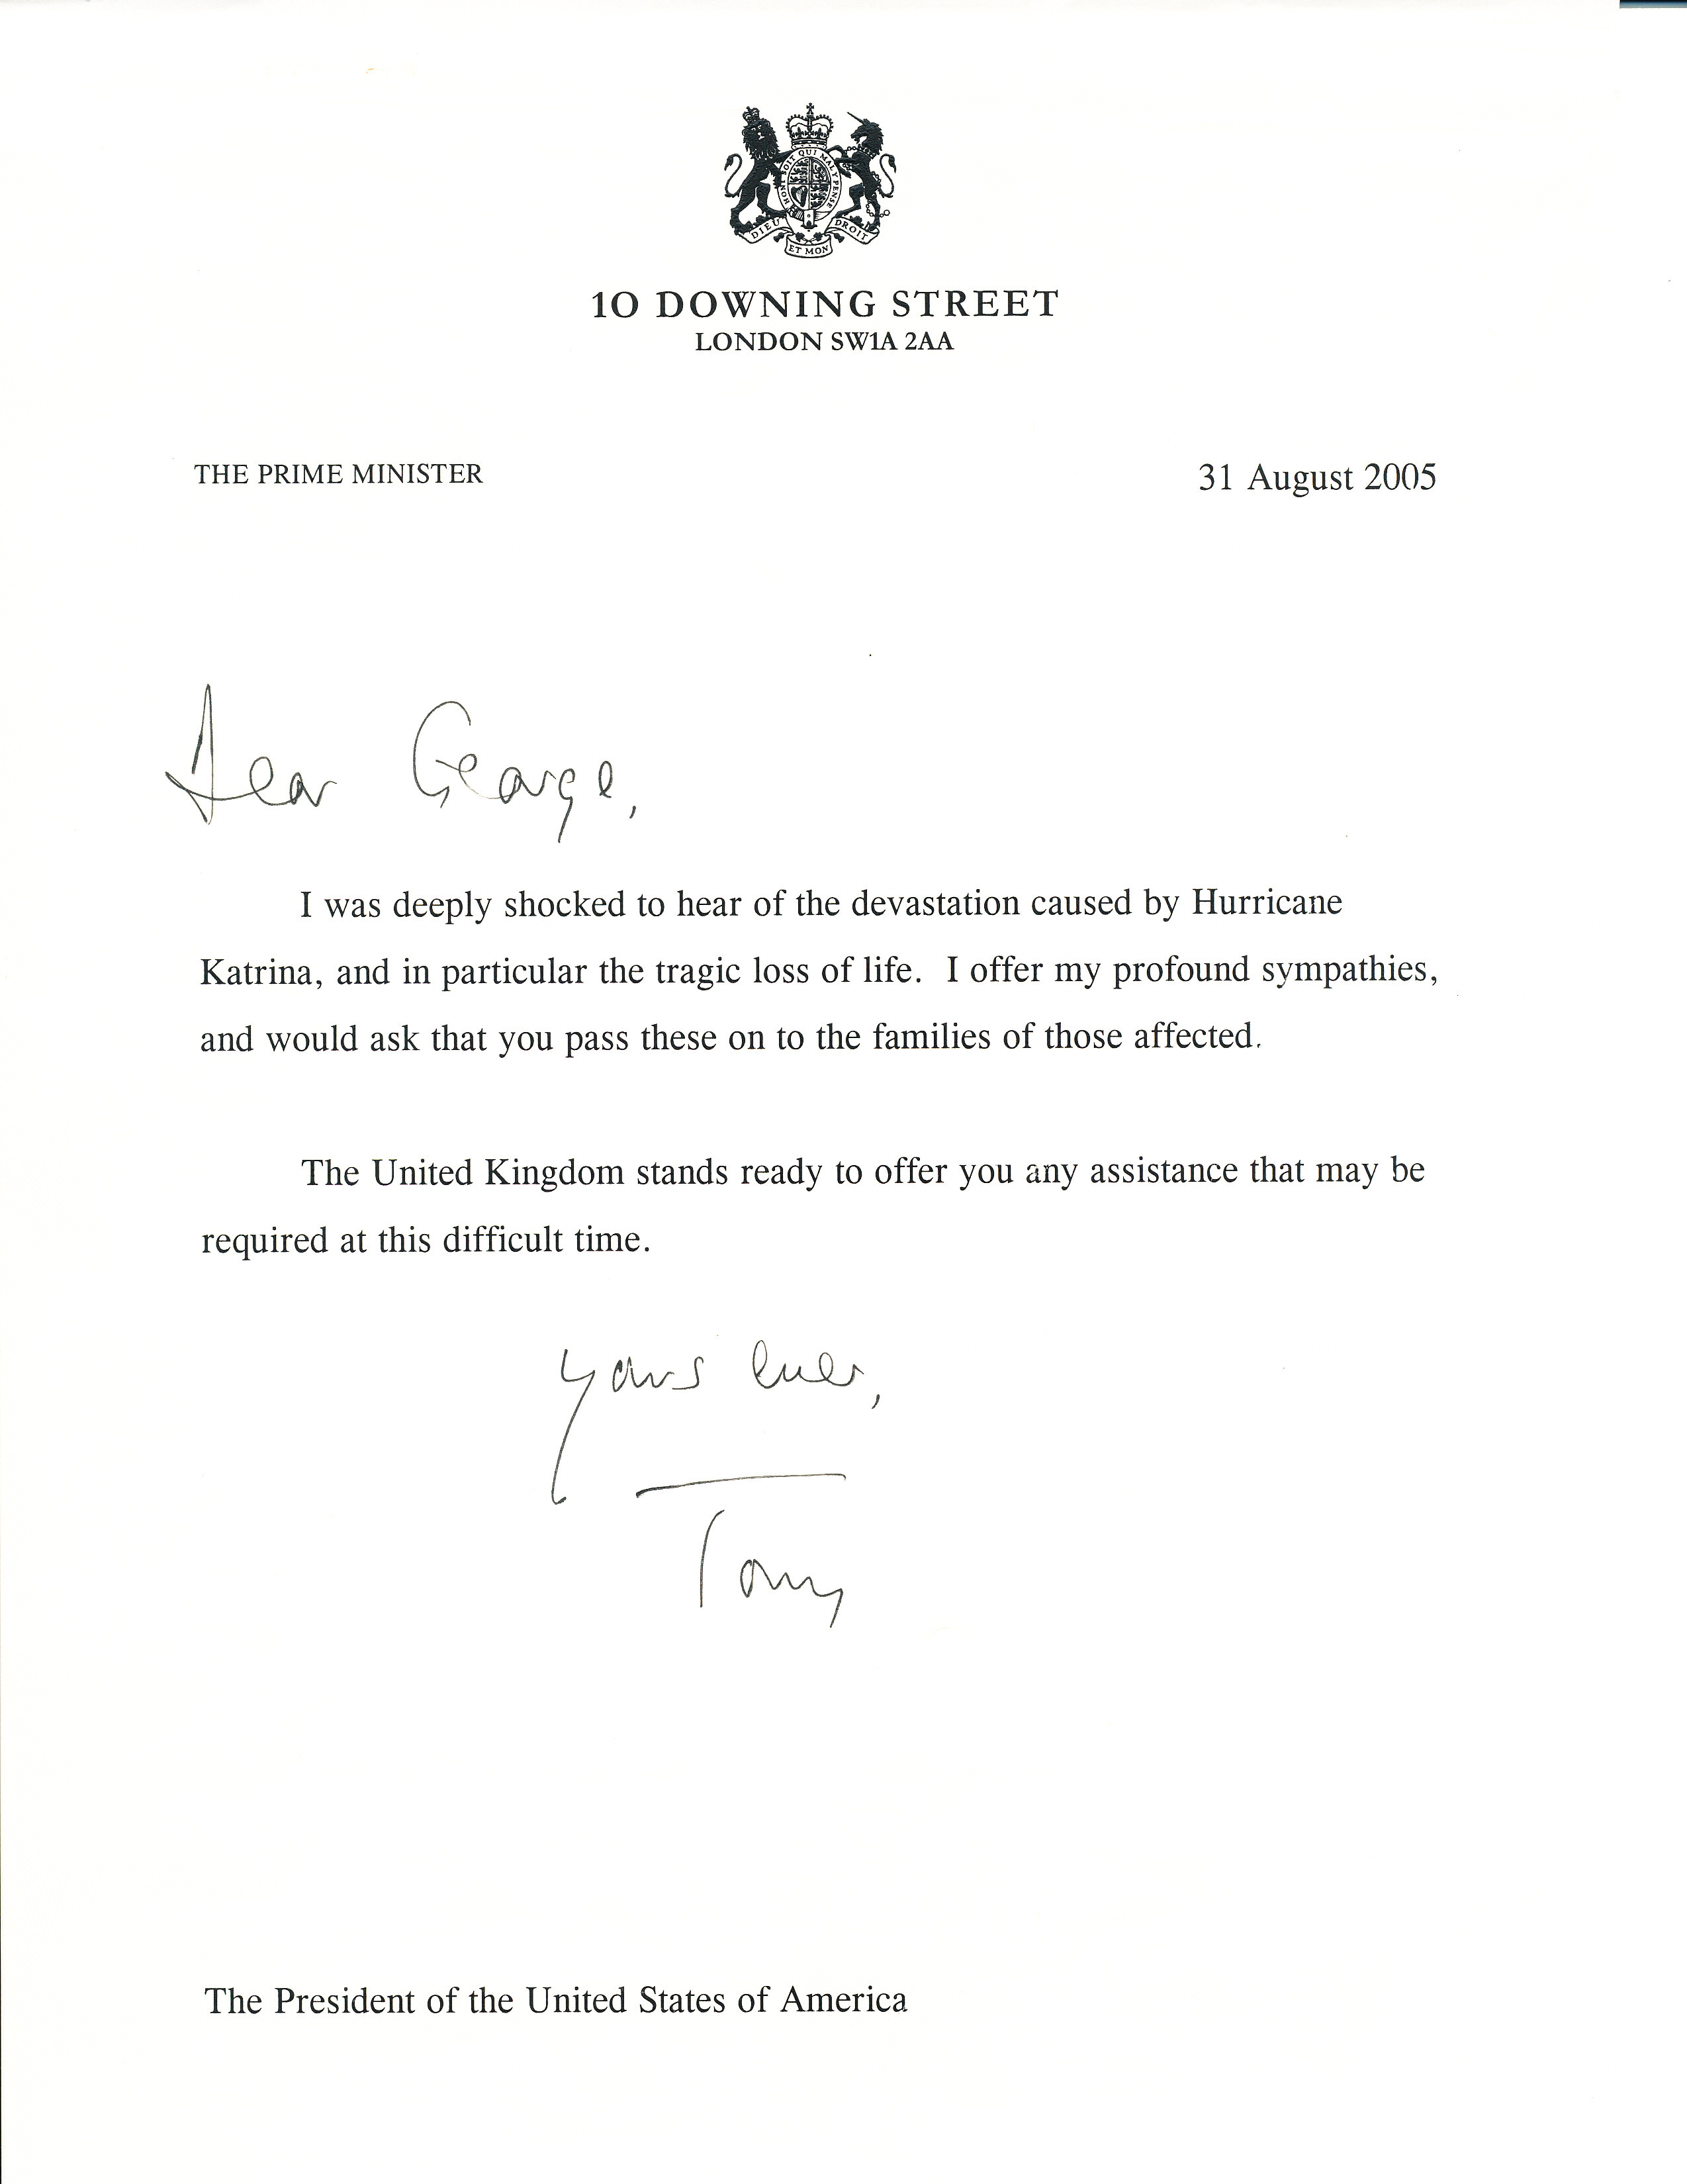 Letter dated August 31, 2005 from British Prime Minister Tony Blair to President George W. Bush expressing concerns regarding the devastation caused by Hurricane Katrina.